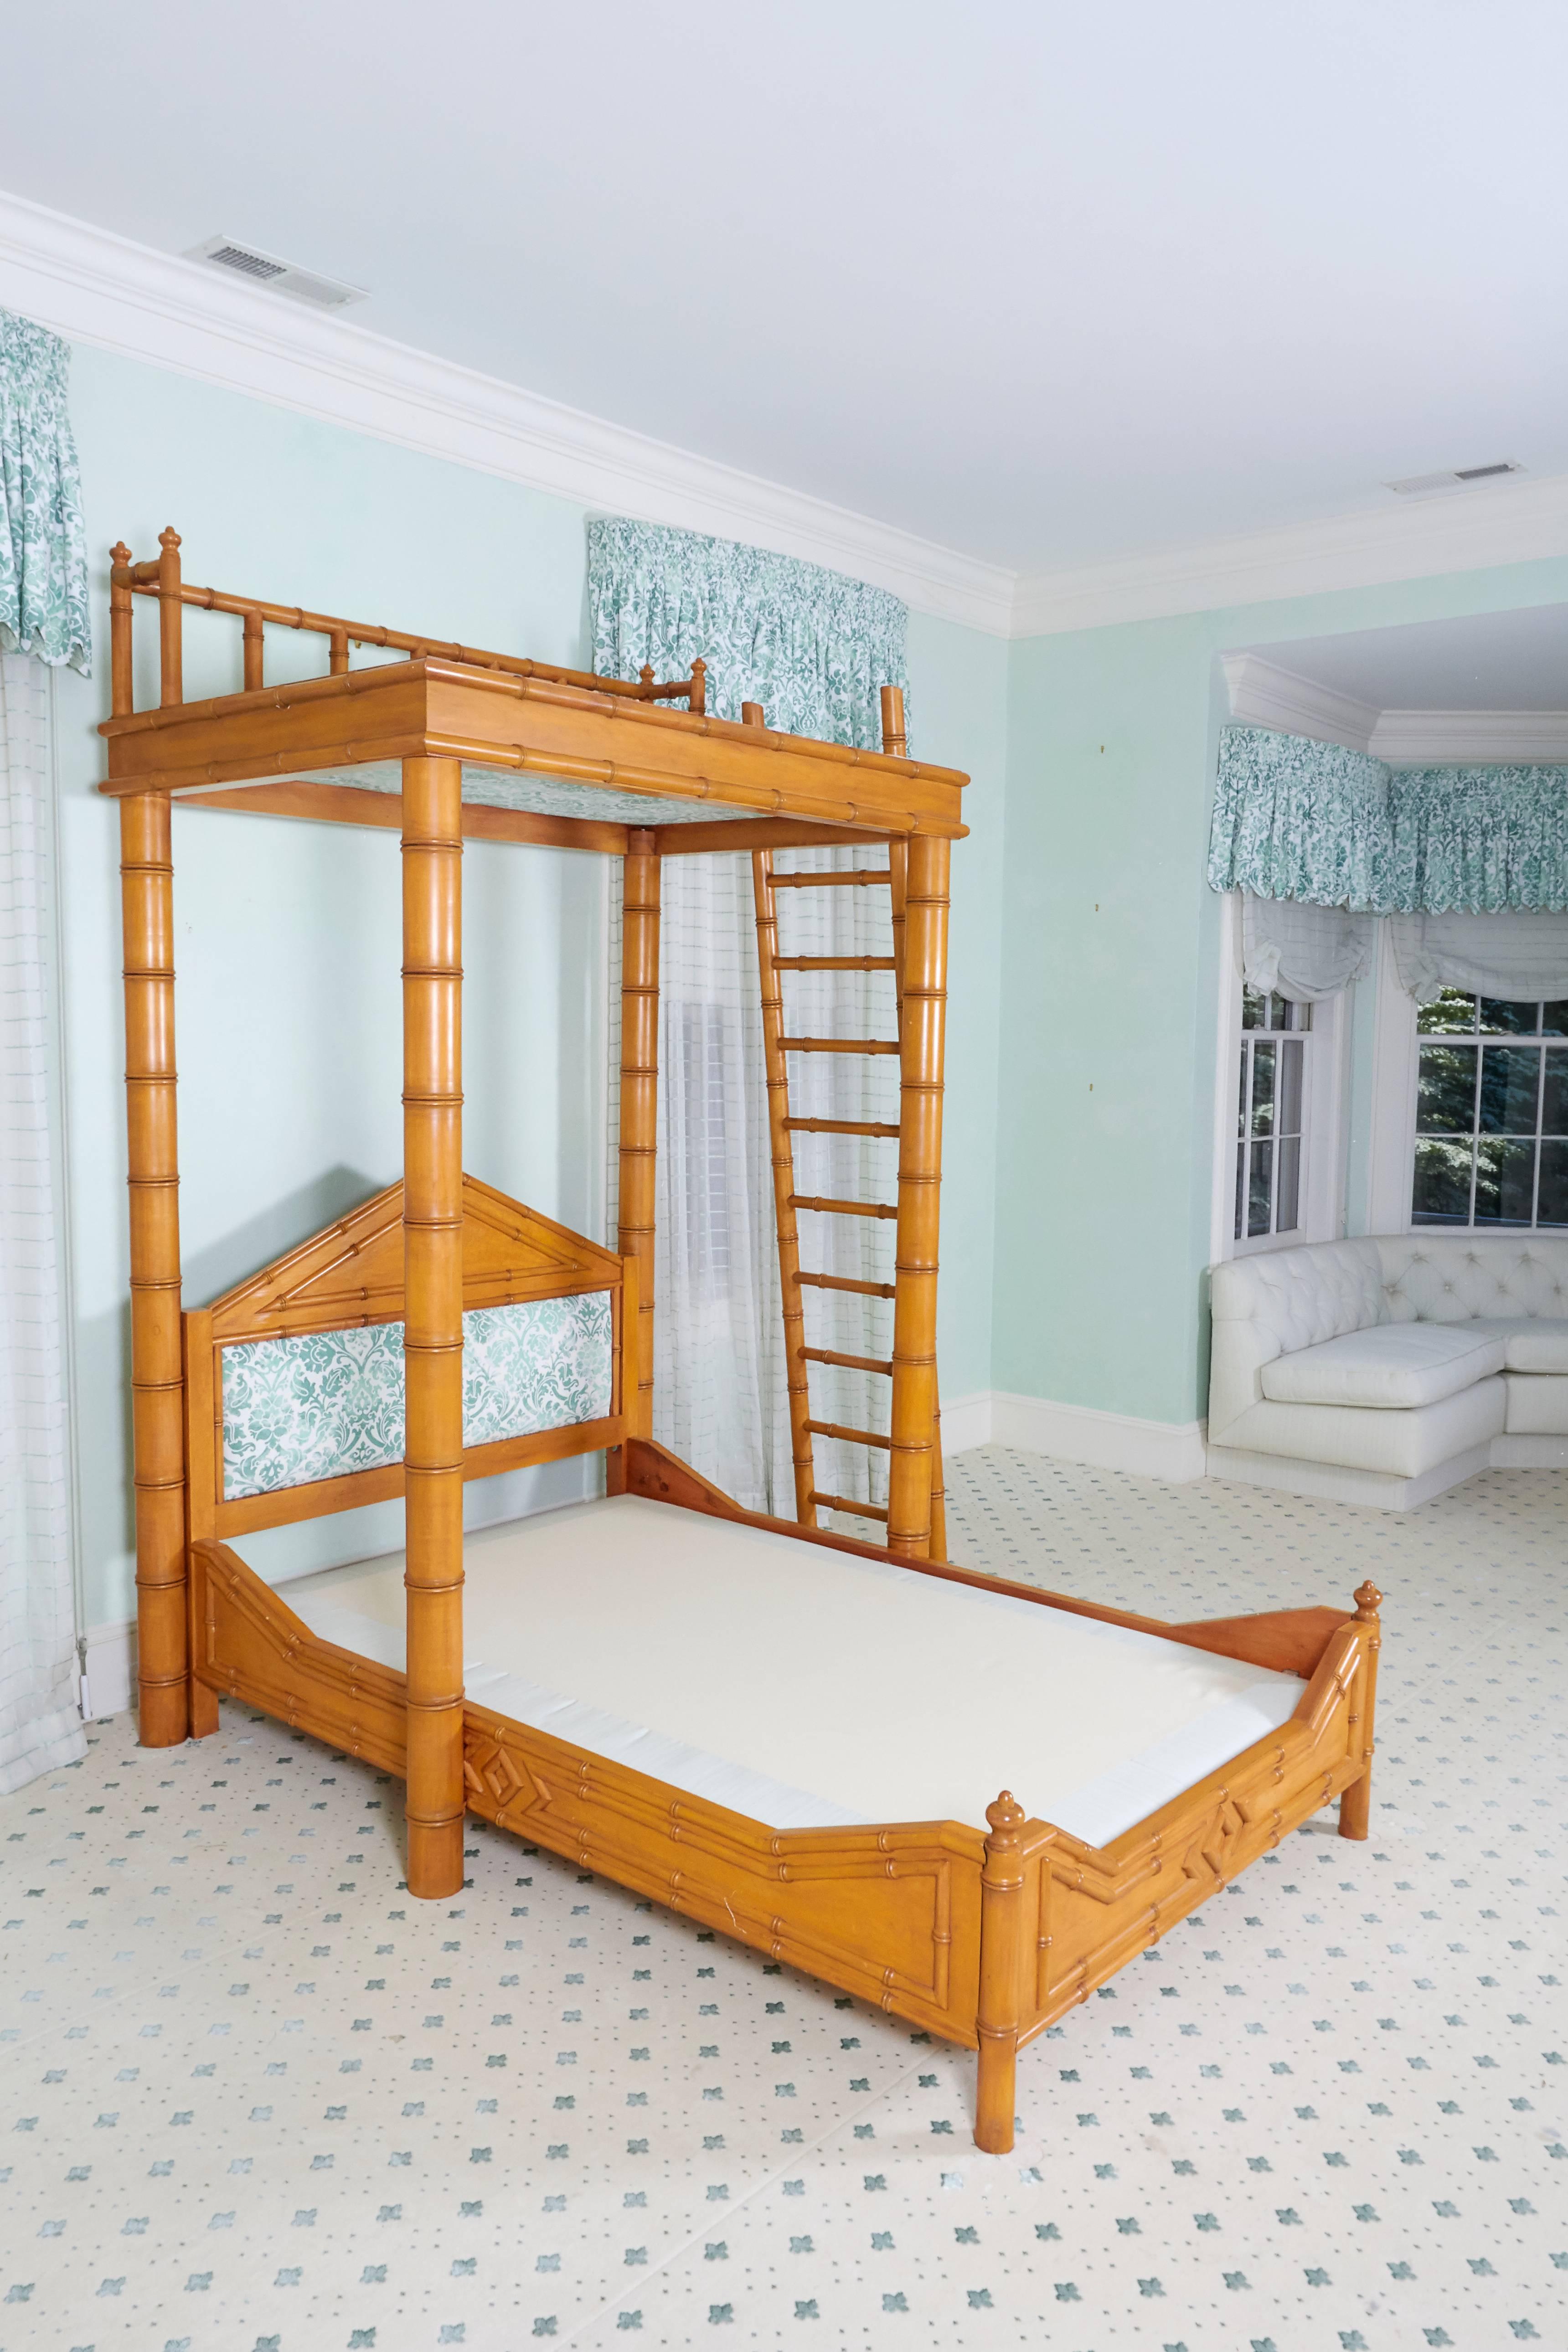 Fits a full size mattress. With triangular shaped headboard and four vertical supports leading to a platform accessible by a detached ladder.